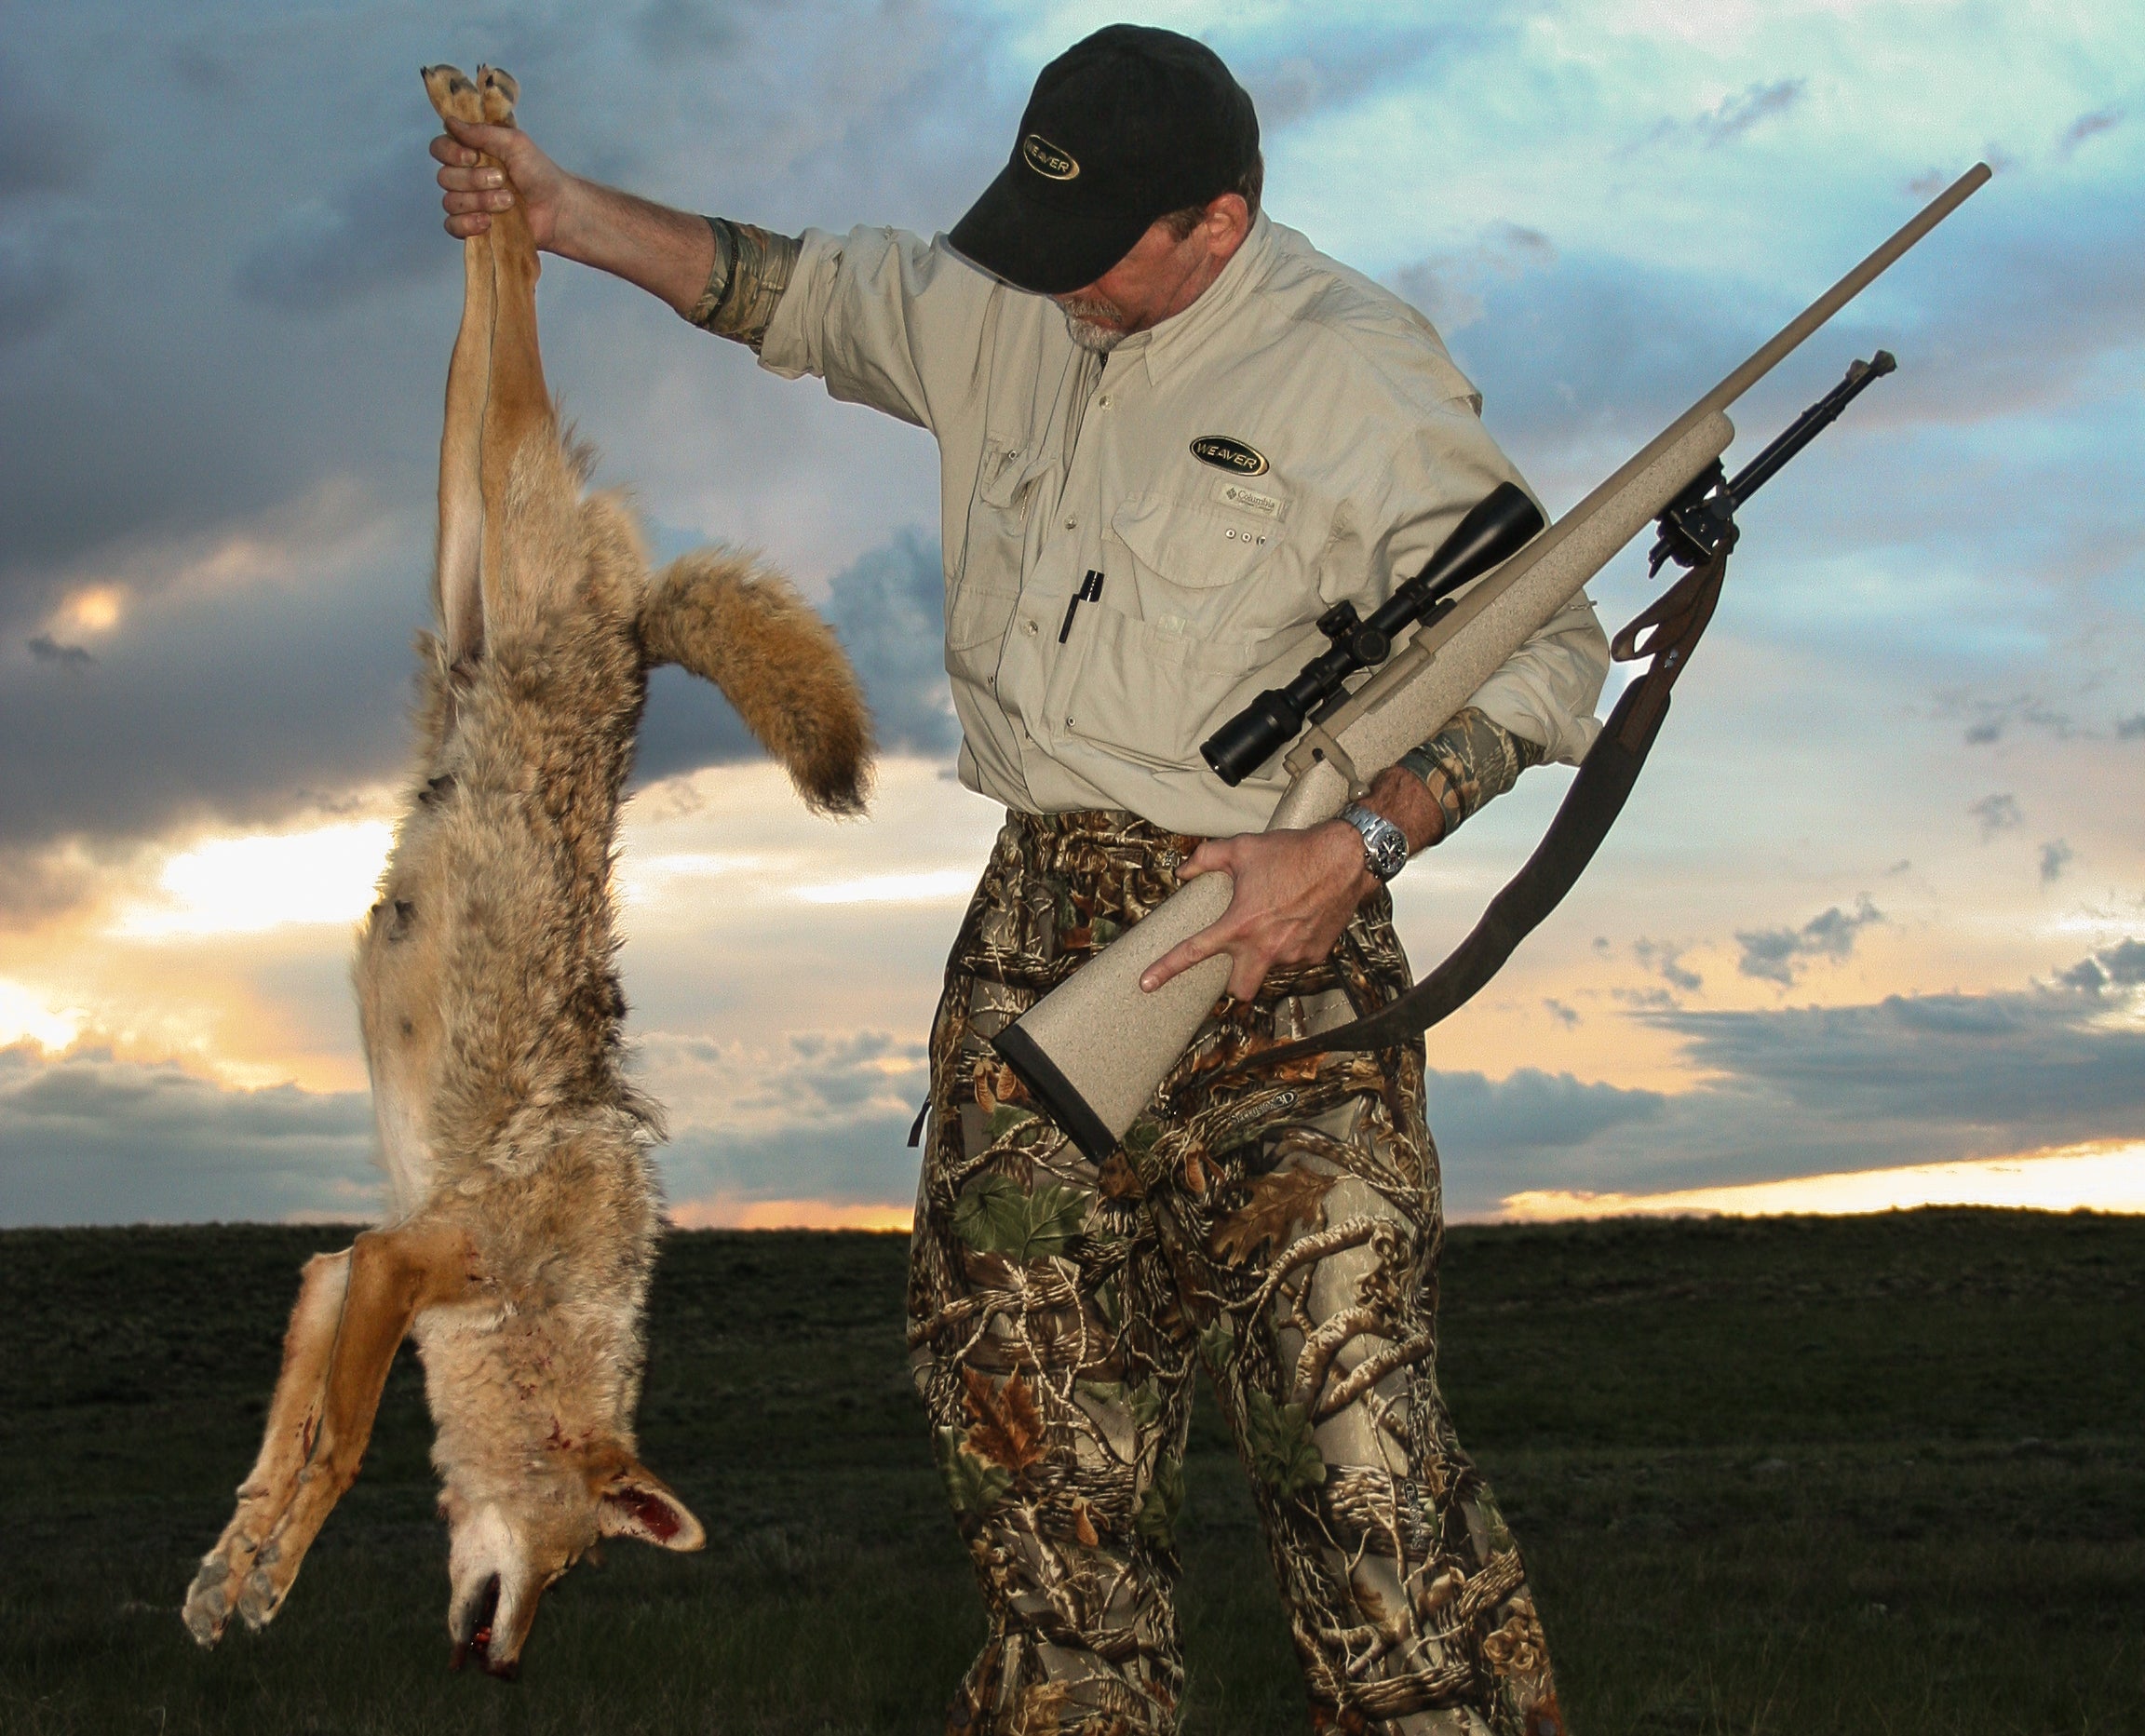 A hunter with a rifle in one hand hold up a coyote in the other